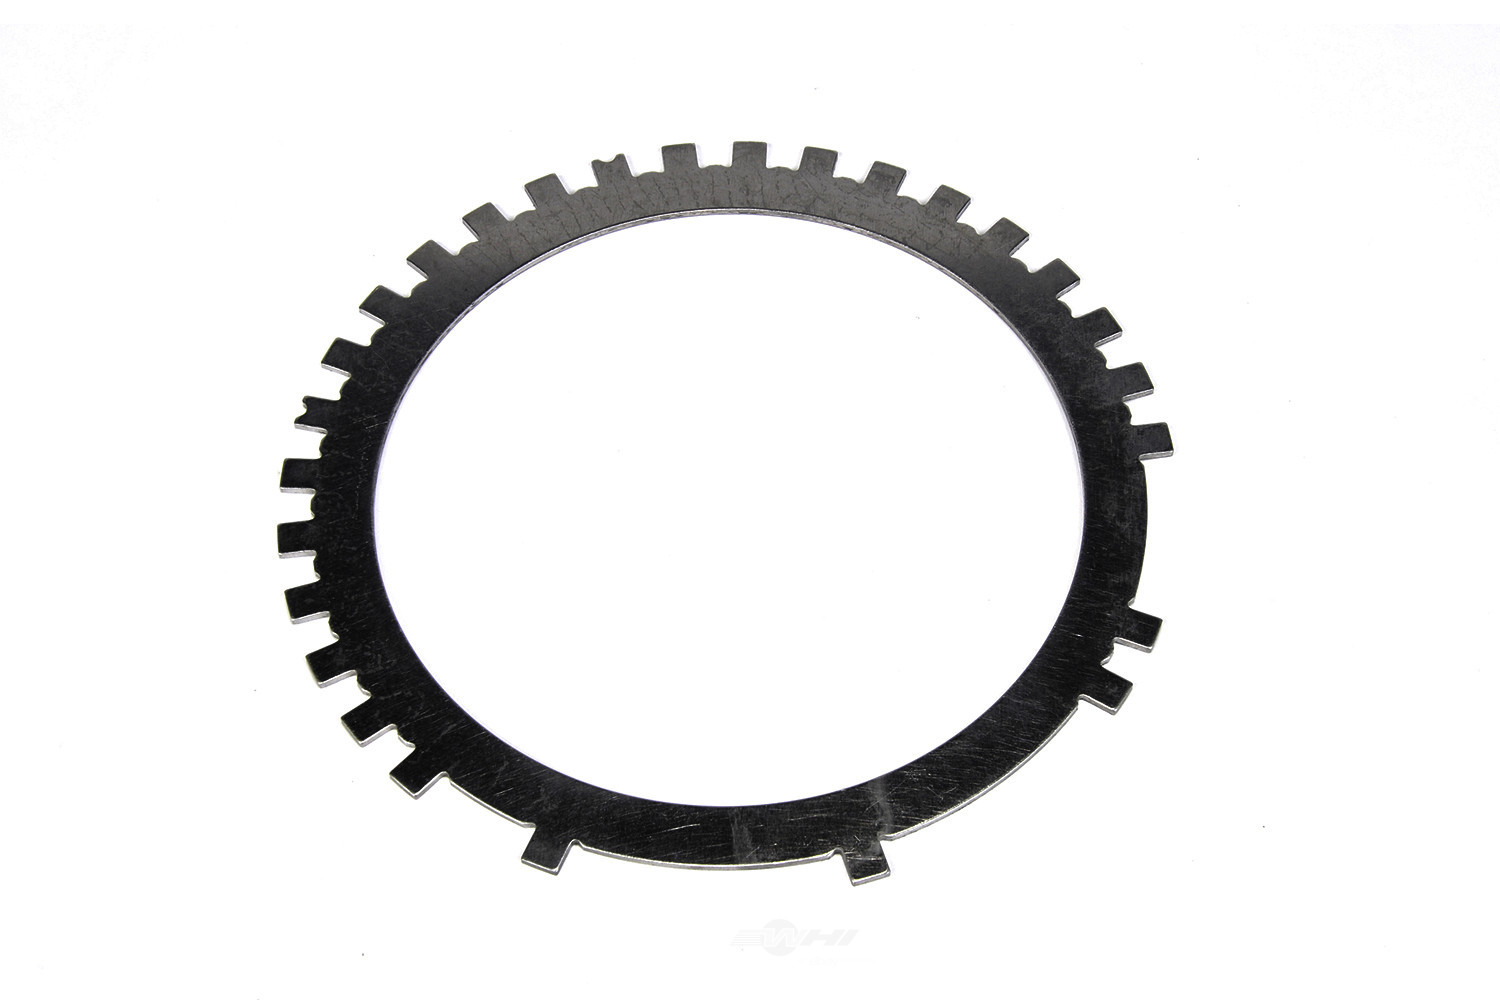 GM GENUINE PARTS - Transmission Clutch Friction Plate (1-2-3-4-5, Reverse) - GMP 24277126